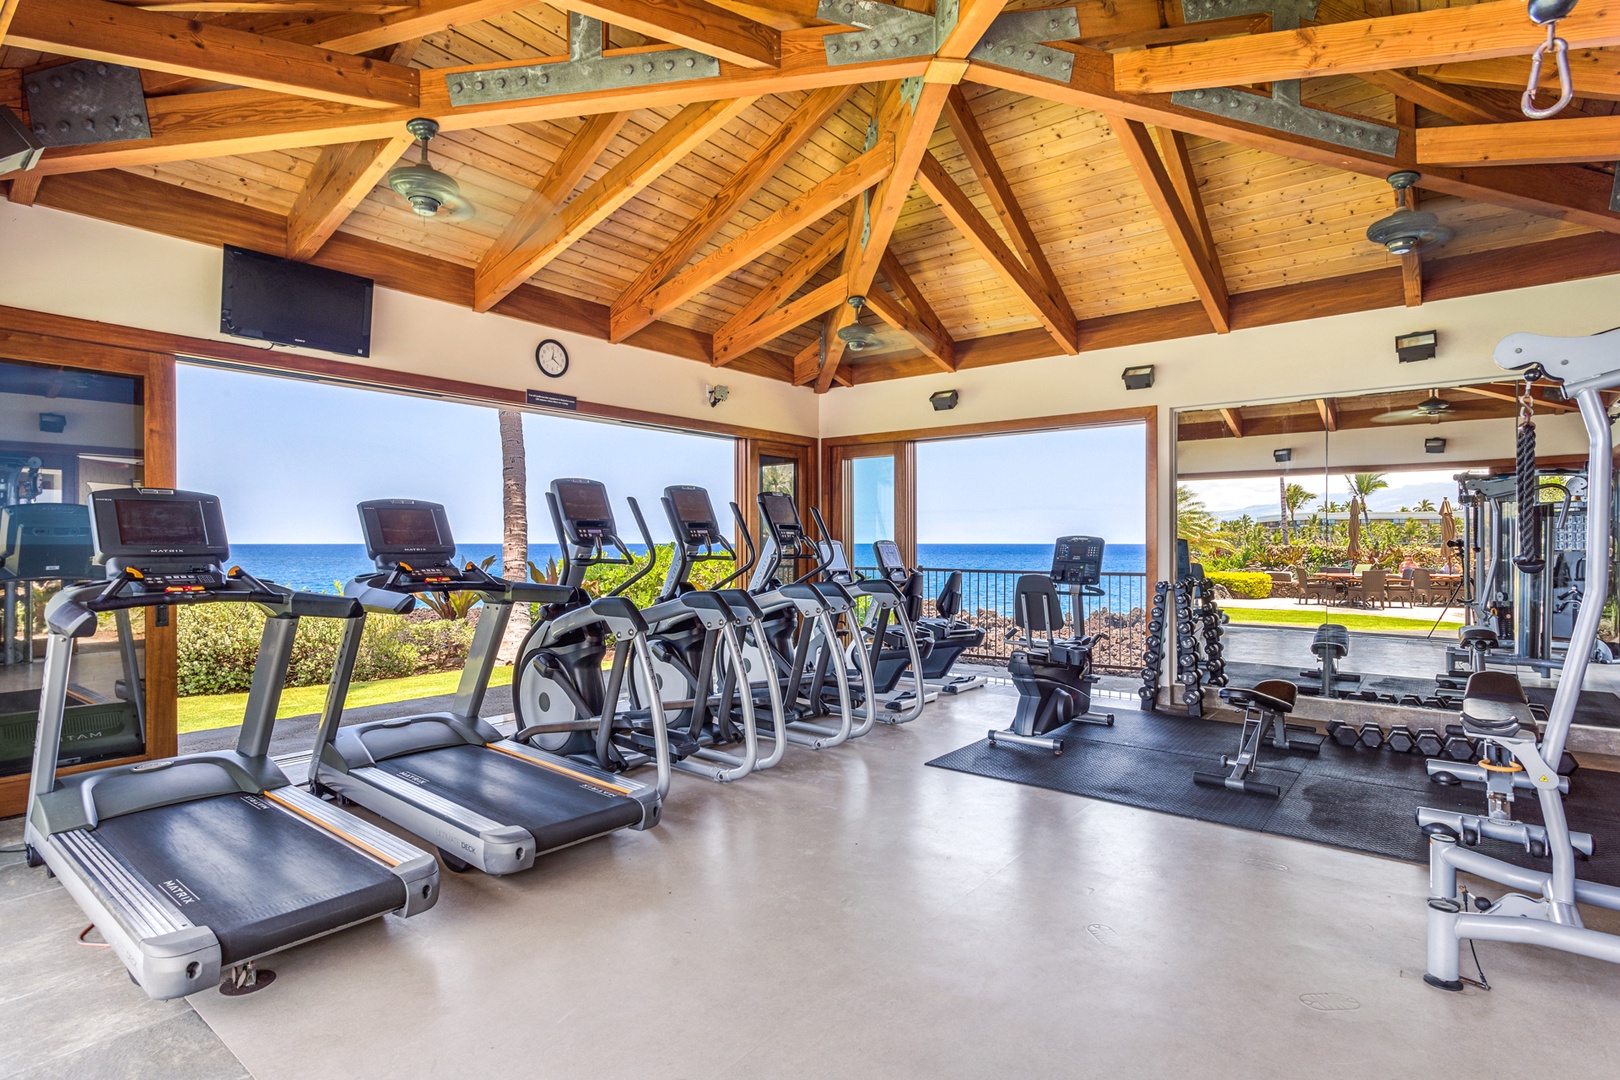 Waikoloa Vacation Rentals, 2BD Hali'i Kai 12C at Waikoloa Resort - Fitness room interior with multiple and varied cardio and weight machines.